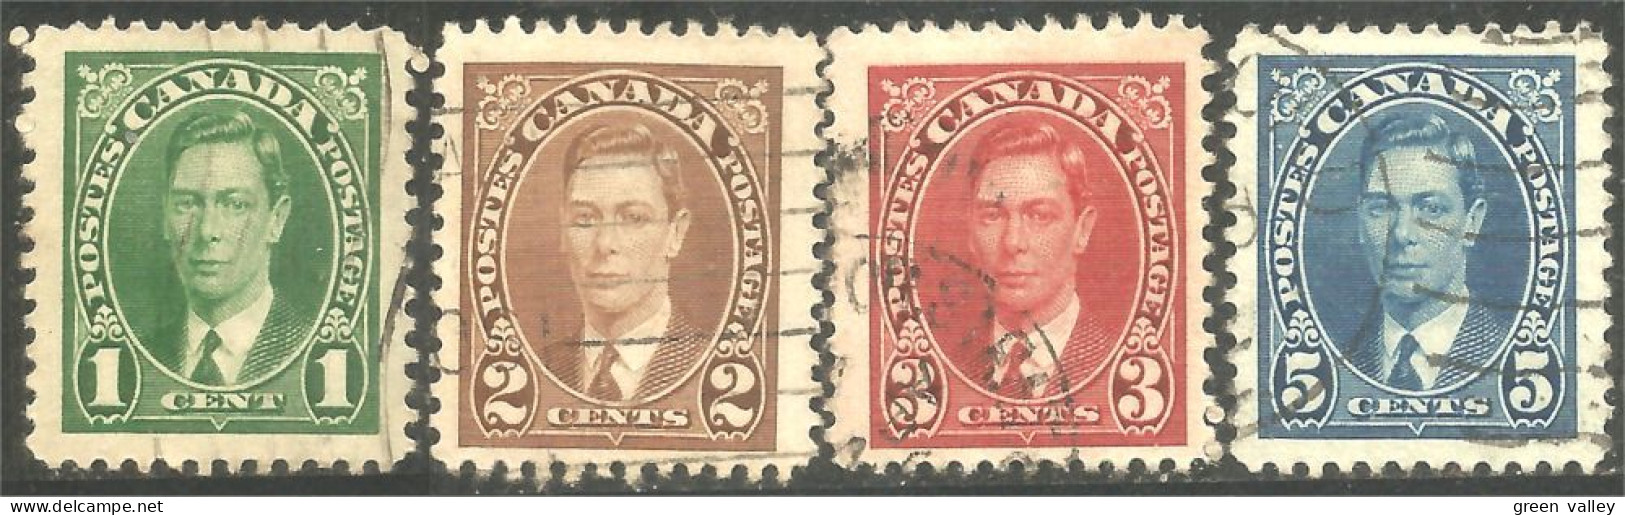 951 Canada 1937 King Roi George VI Mufti Issue 4 Timbres Stamps (484f) - Familles Royales